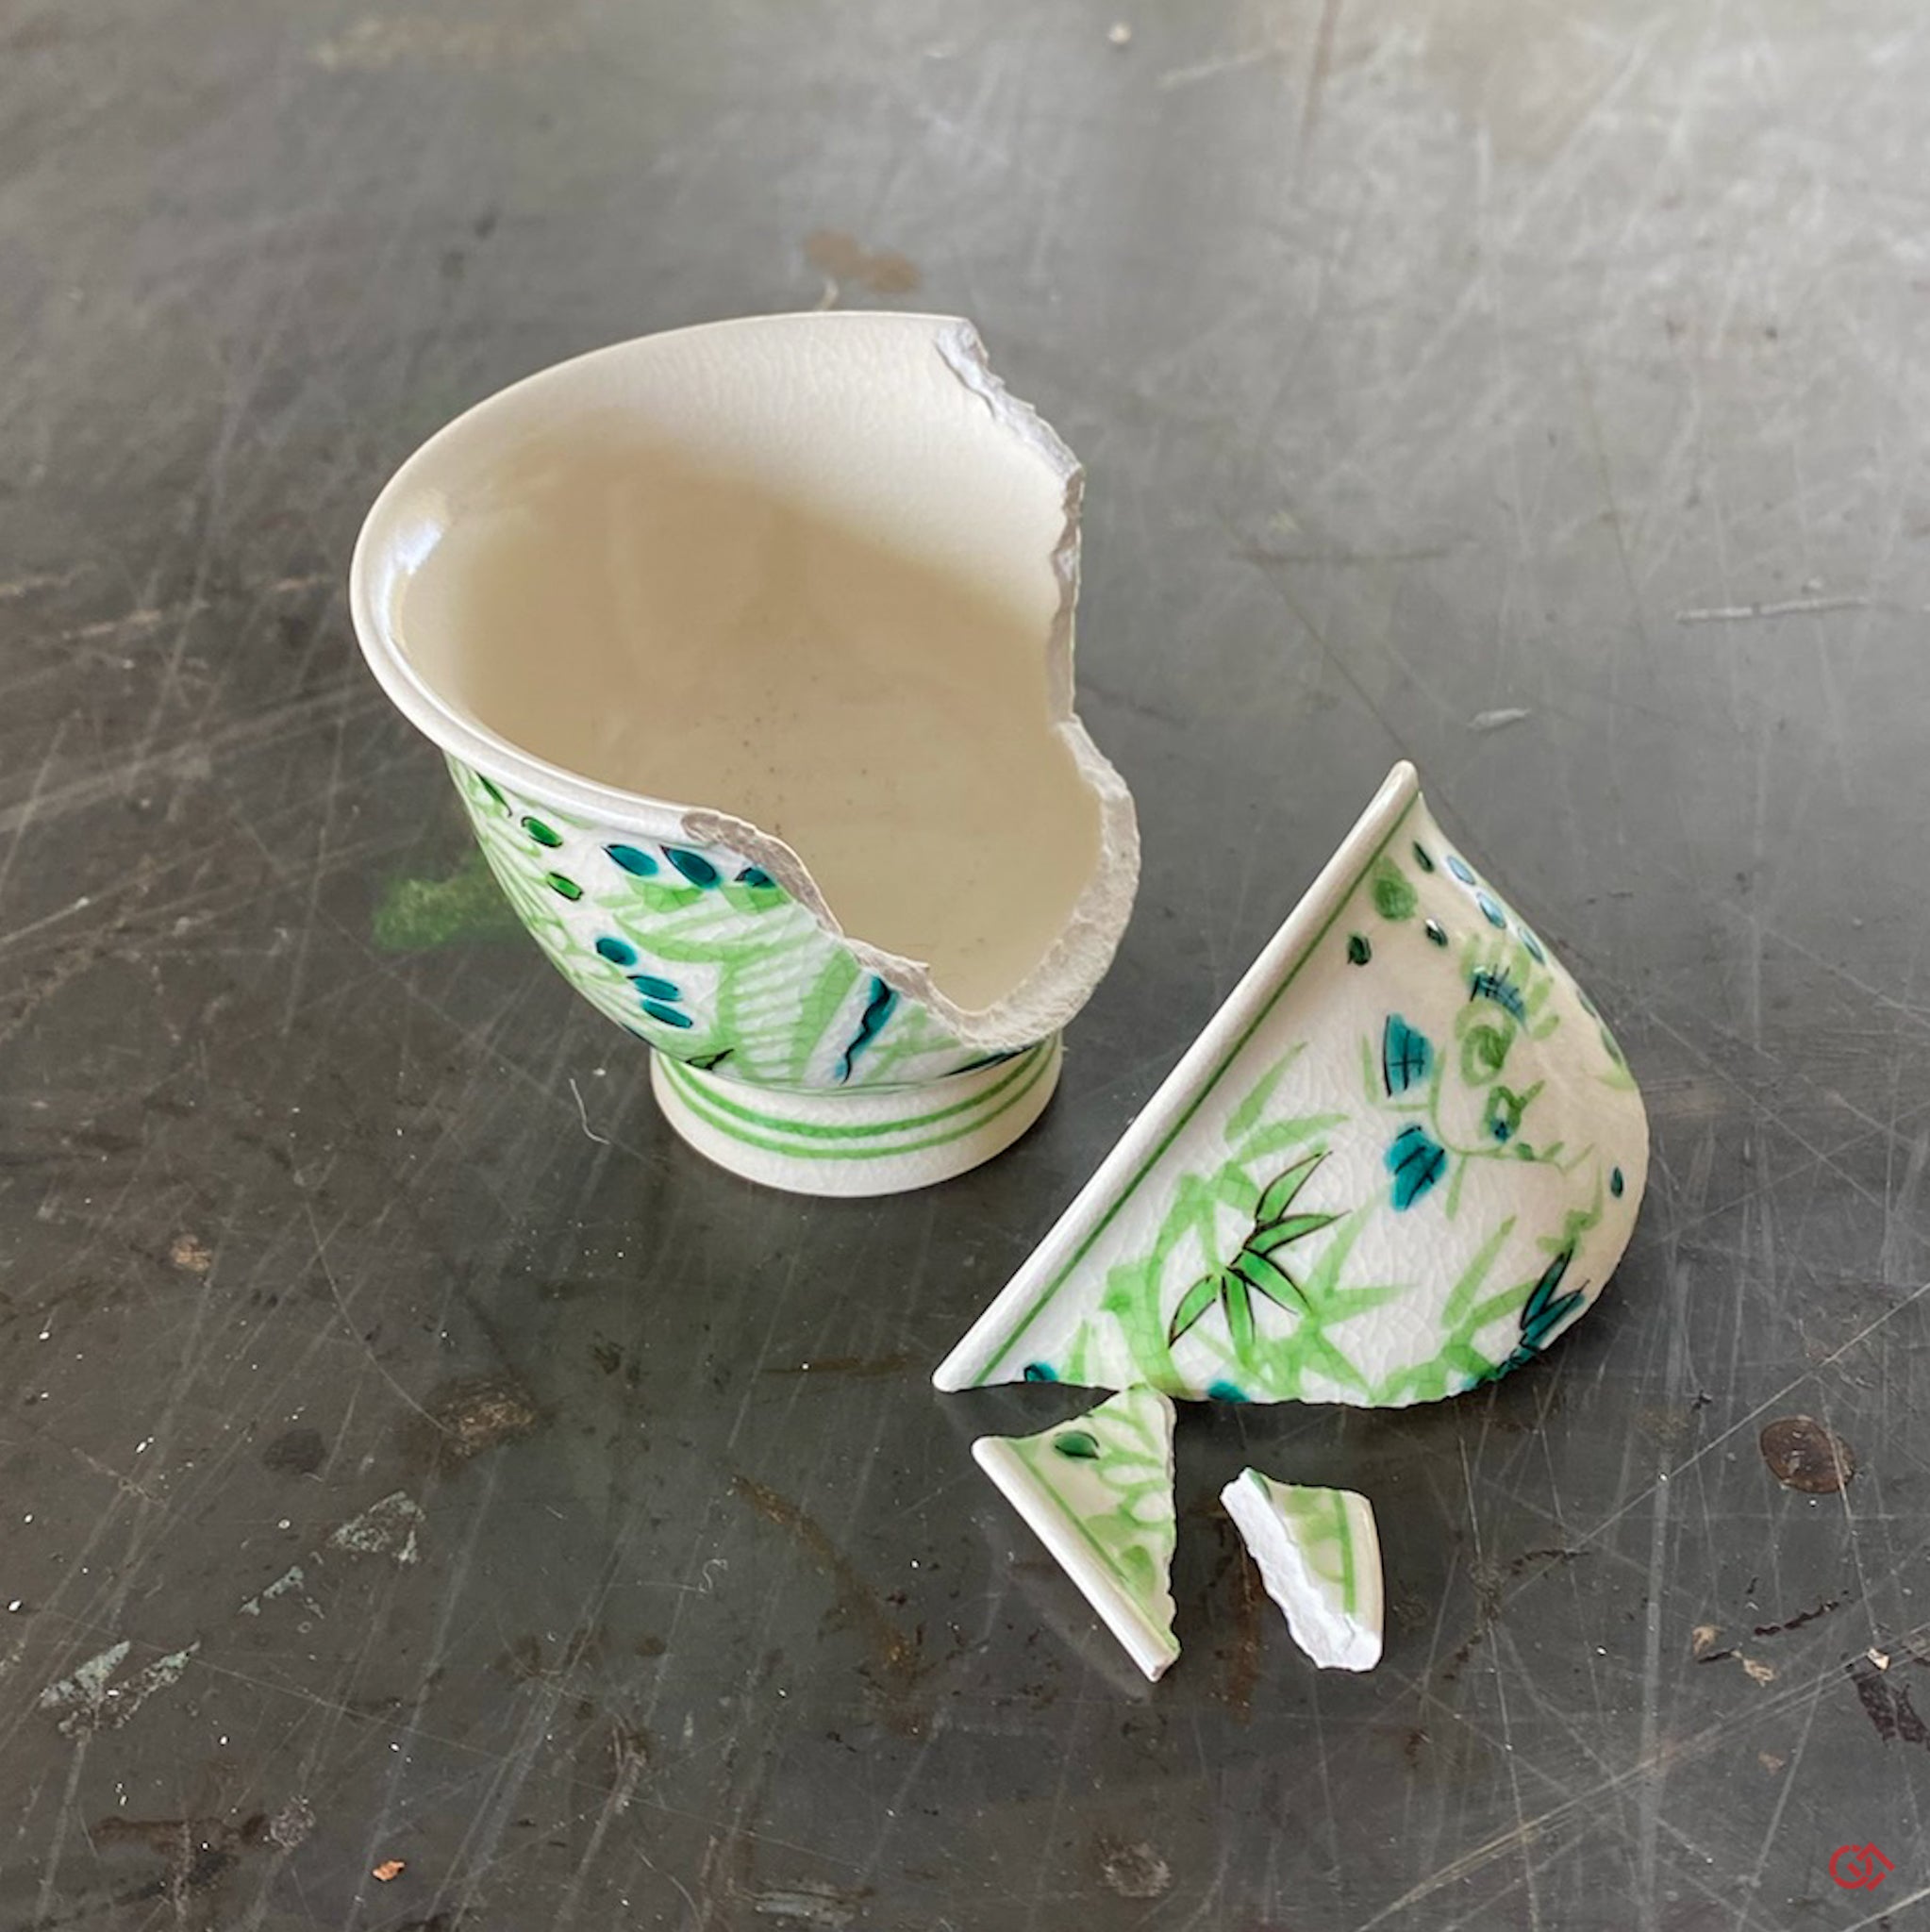 Kintsugi: The Japanese Art of Finding Beauty in Broken Dishes